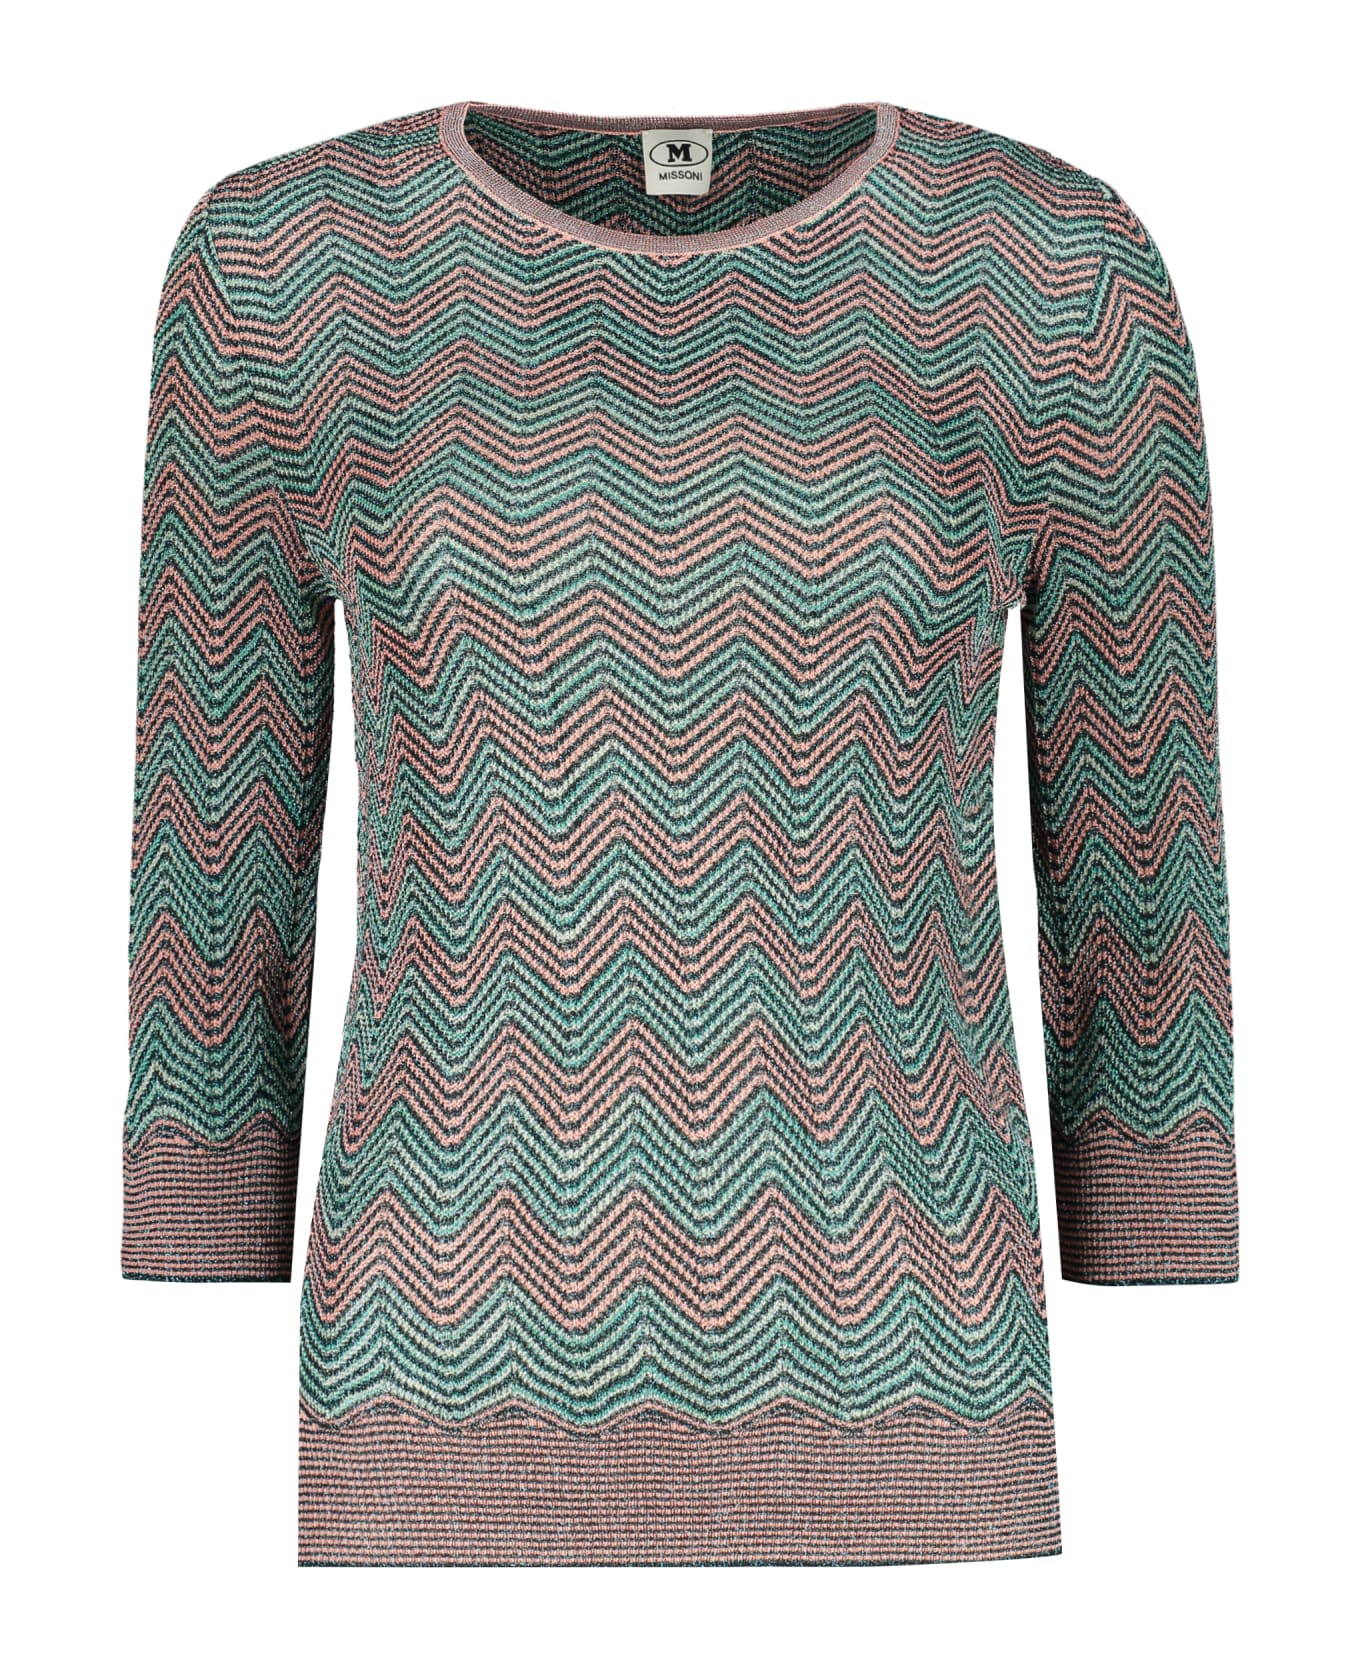 M Missoni Knitted Top - Multicolor